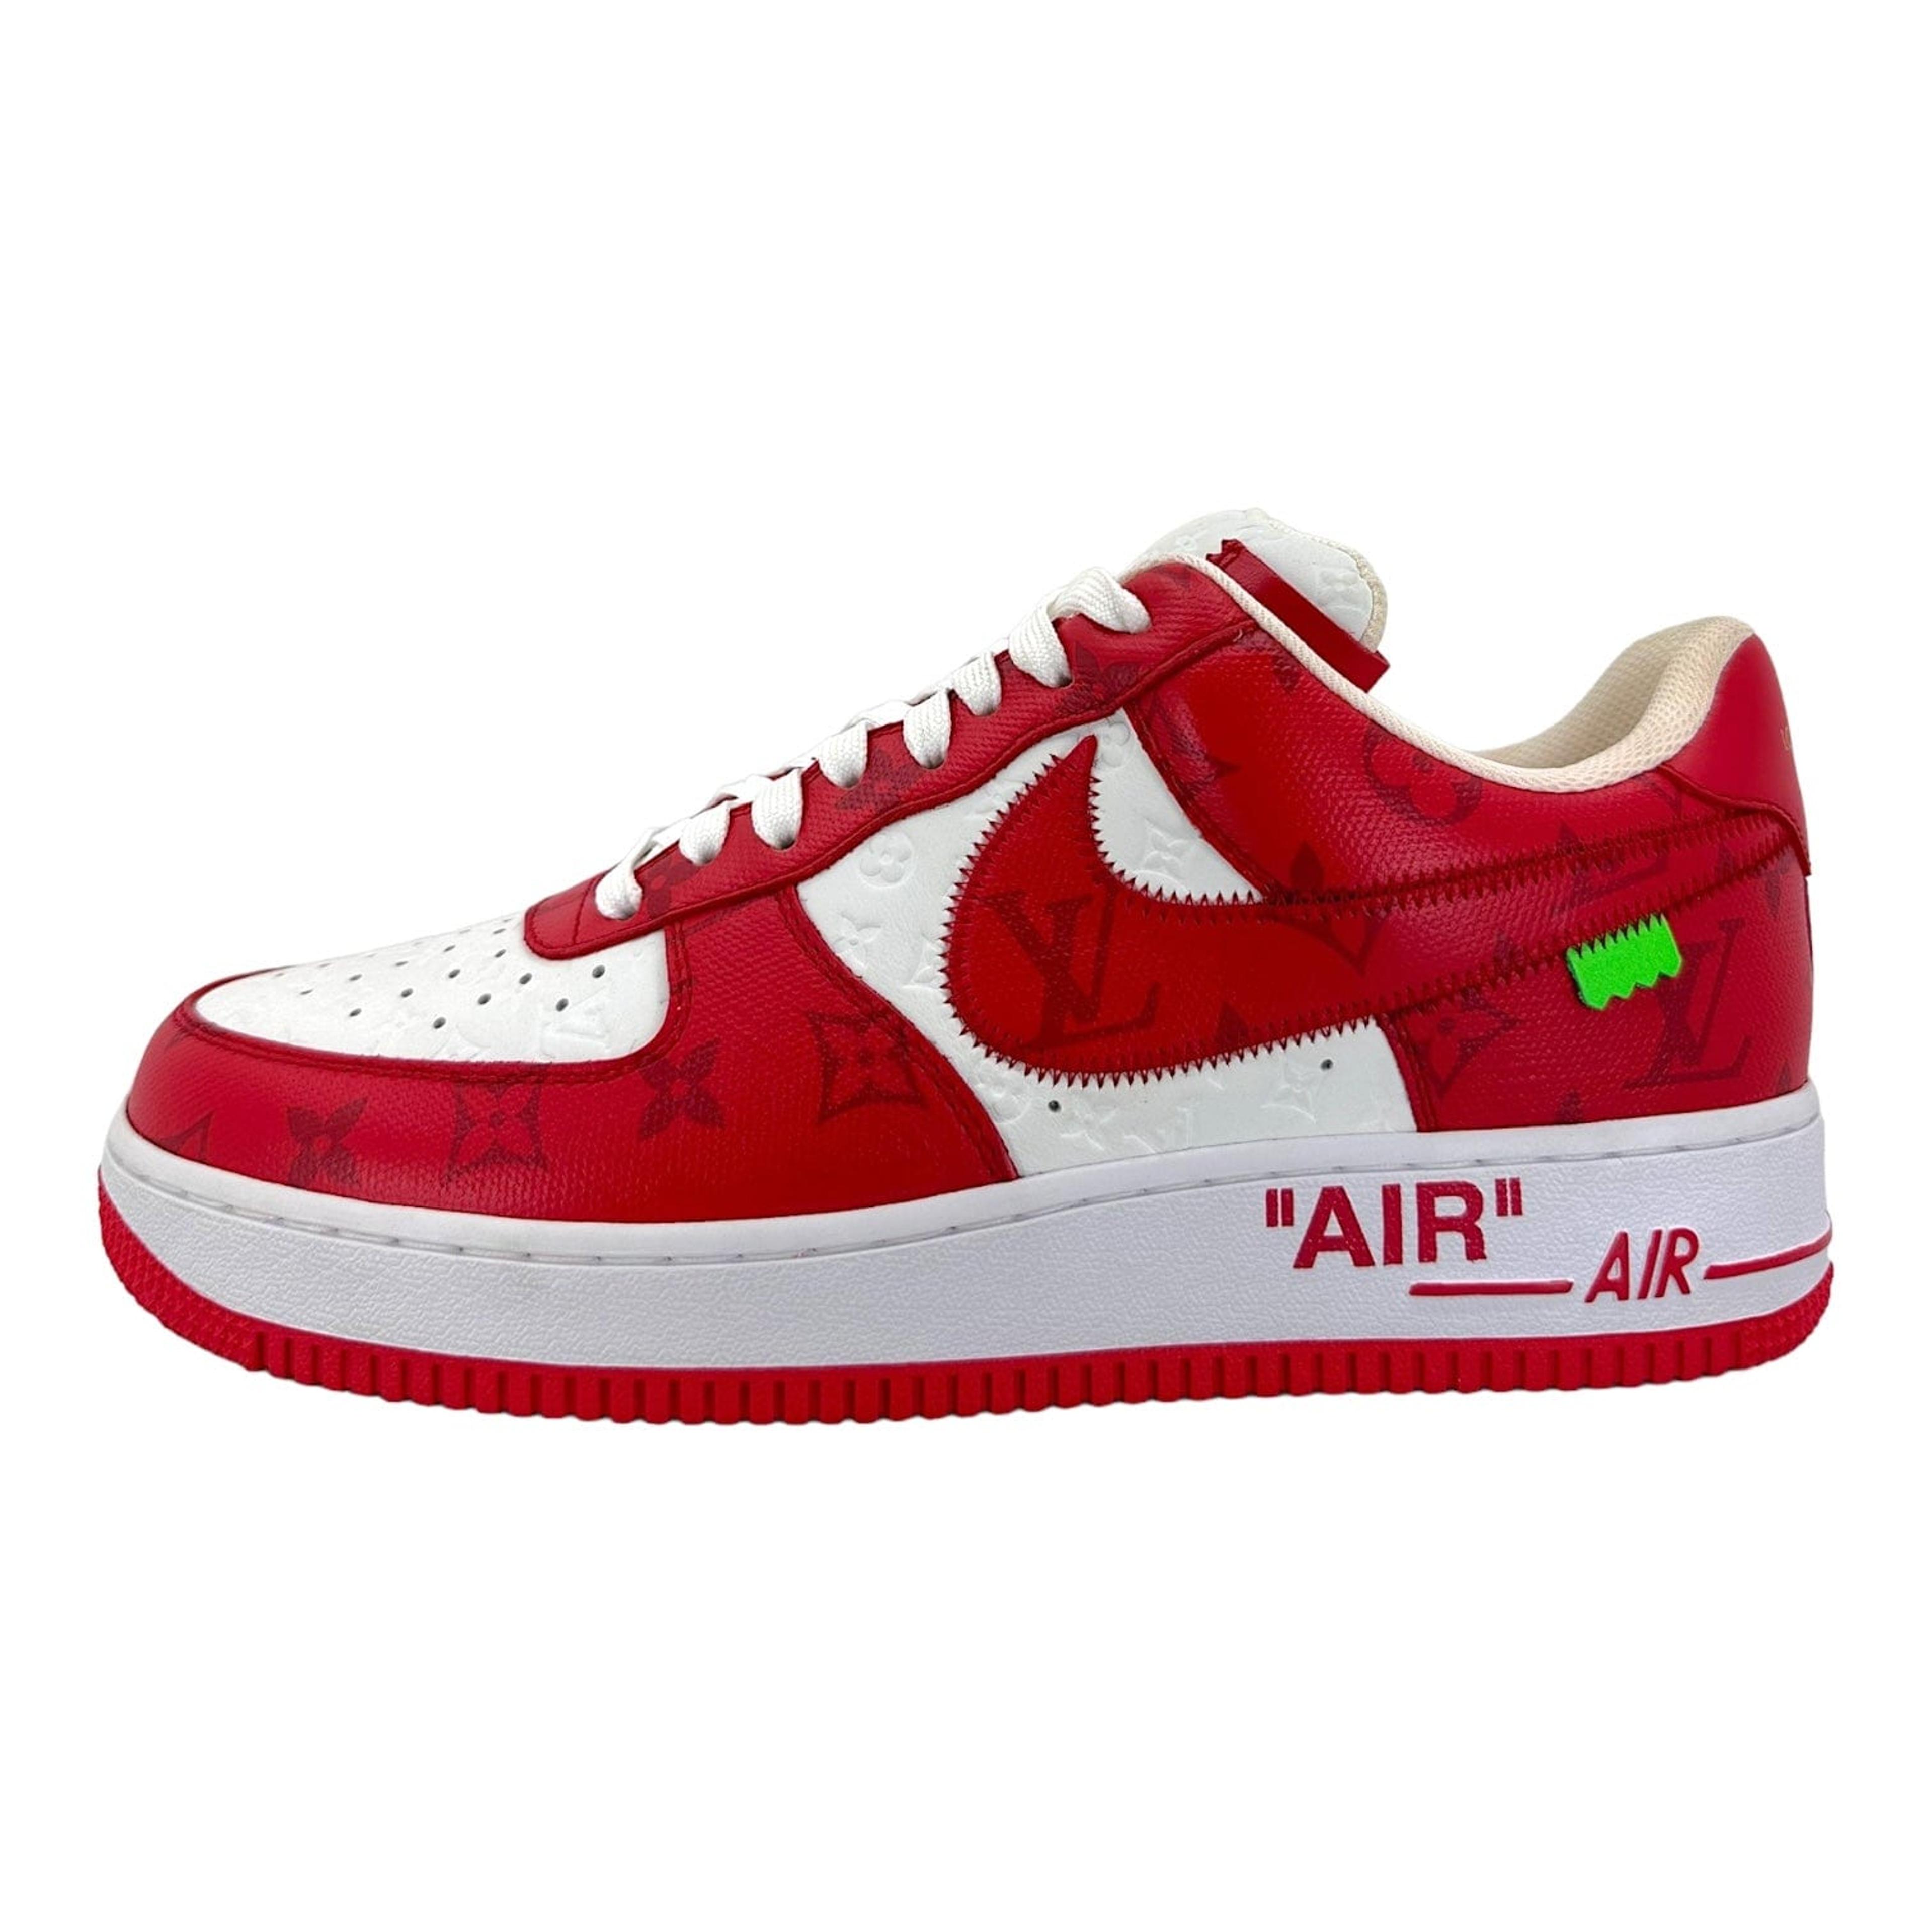 Alternate View 1 of Louis Vuitton x Nike Air Force 1 Low By Virgil Abloh White Red